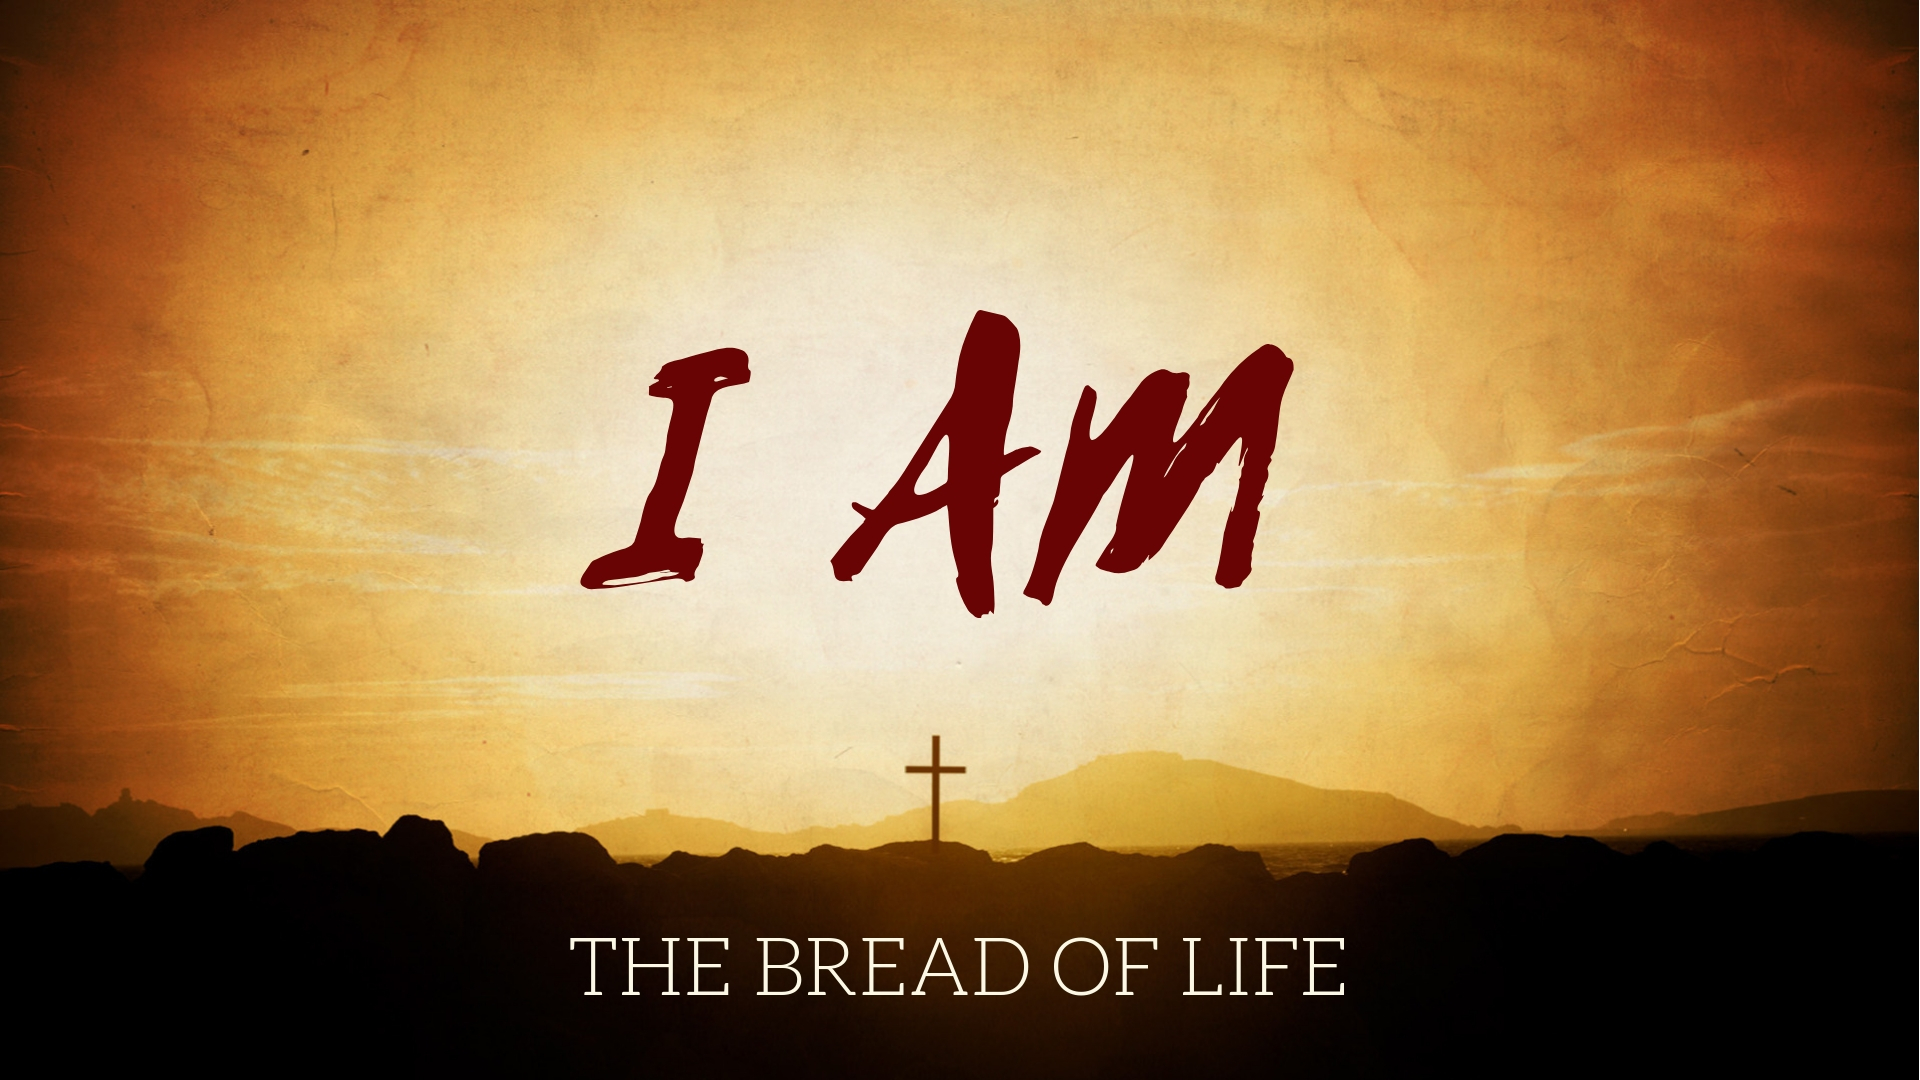 i am the bread of life